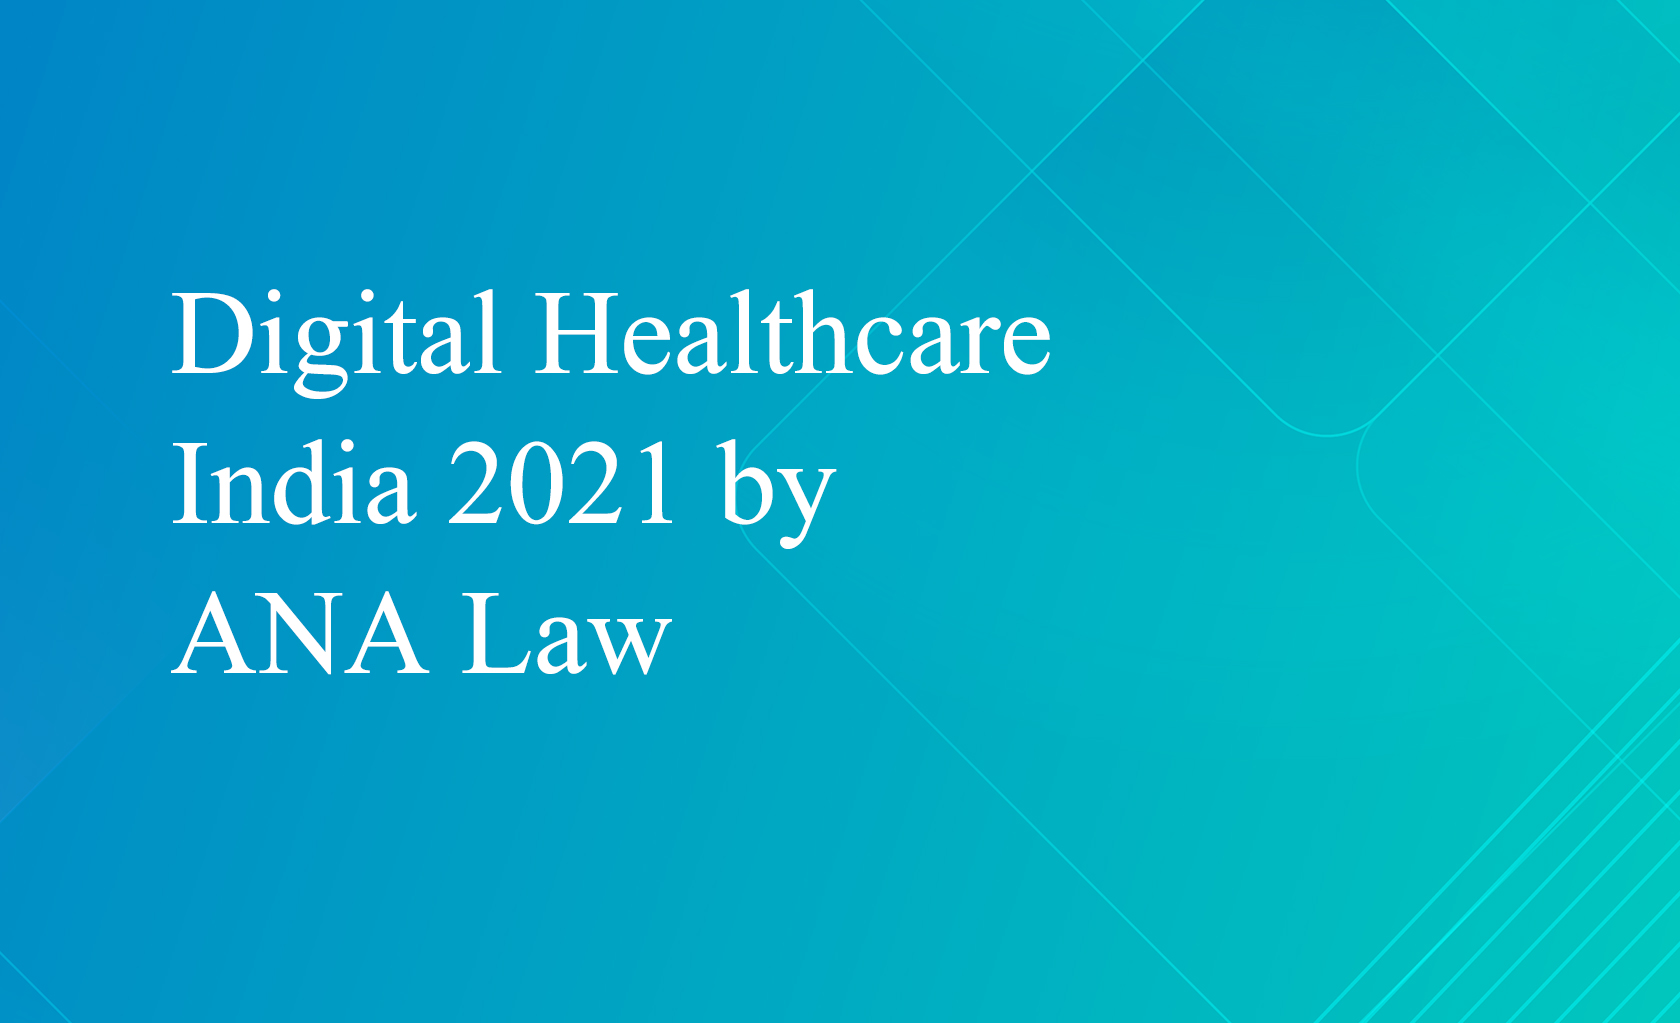 Digital Healthcare India 2021 by ANA Law